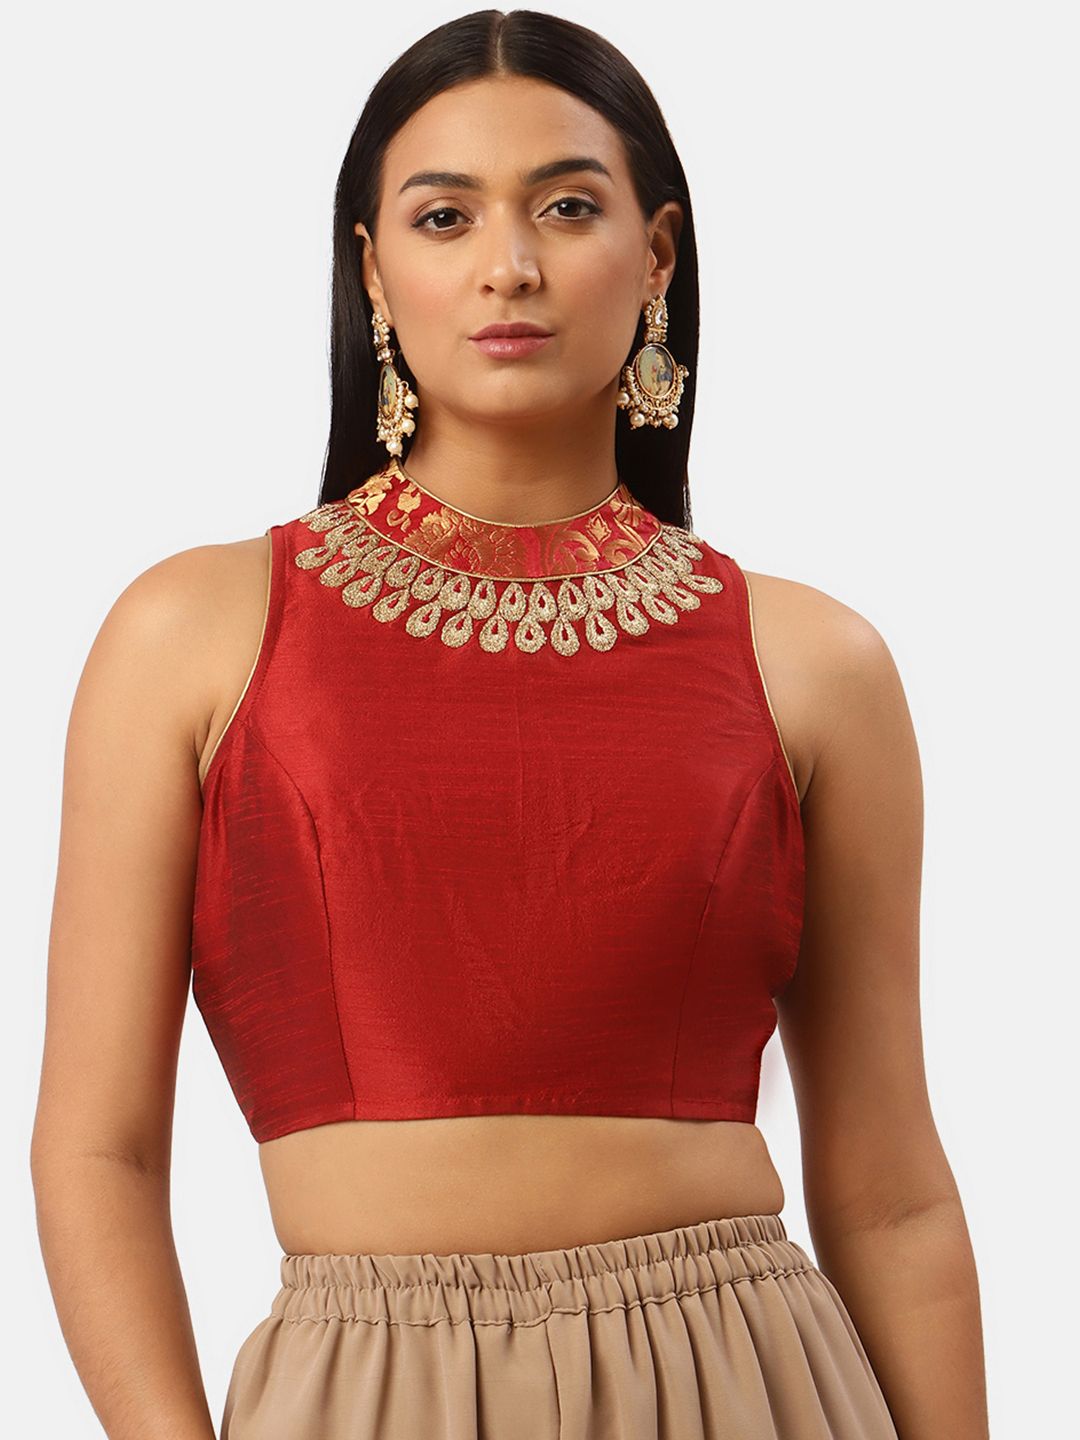 Studio Shringaar Red Ethnic Motifs Embroidered Saree Blouse Price in India